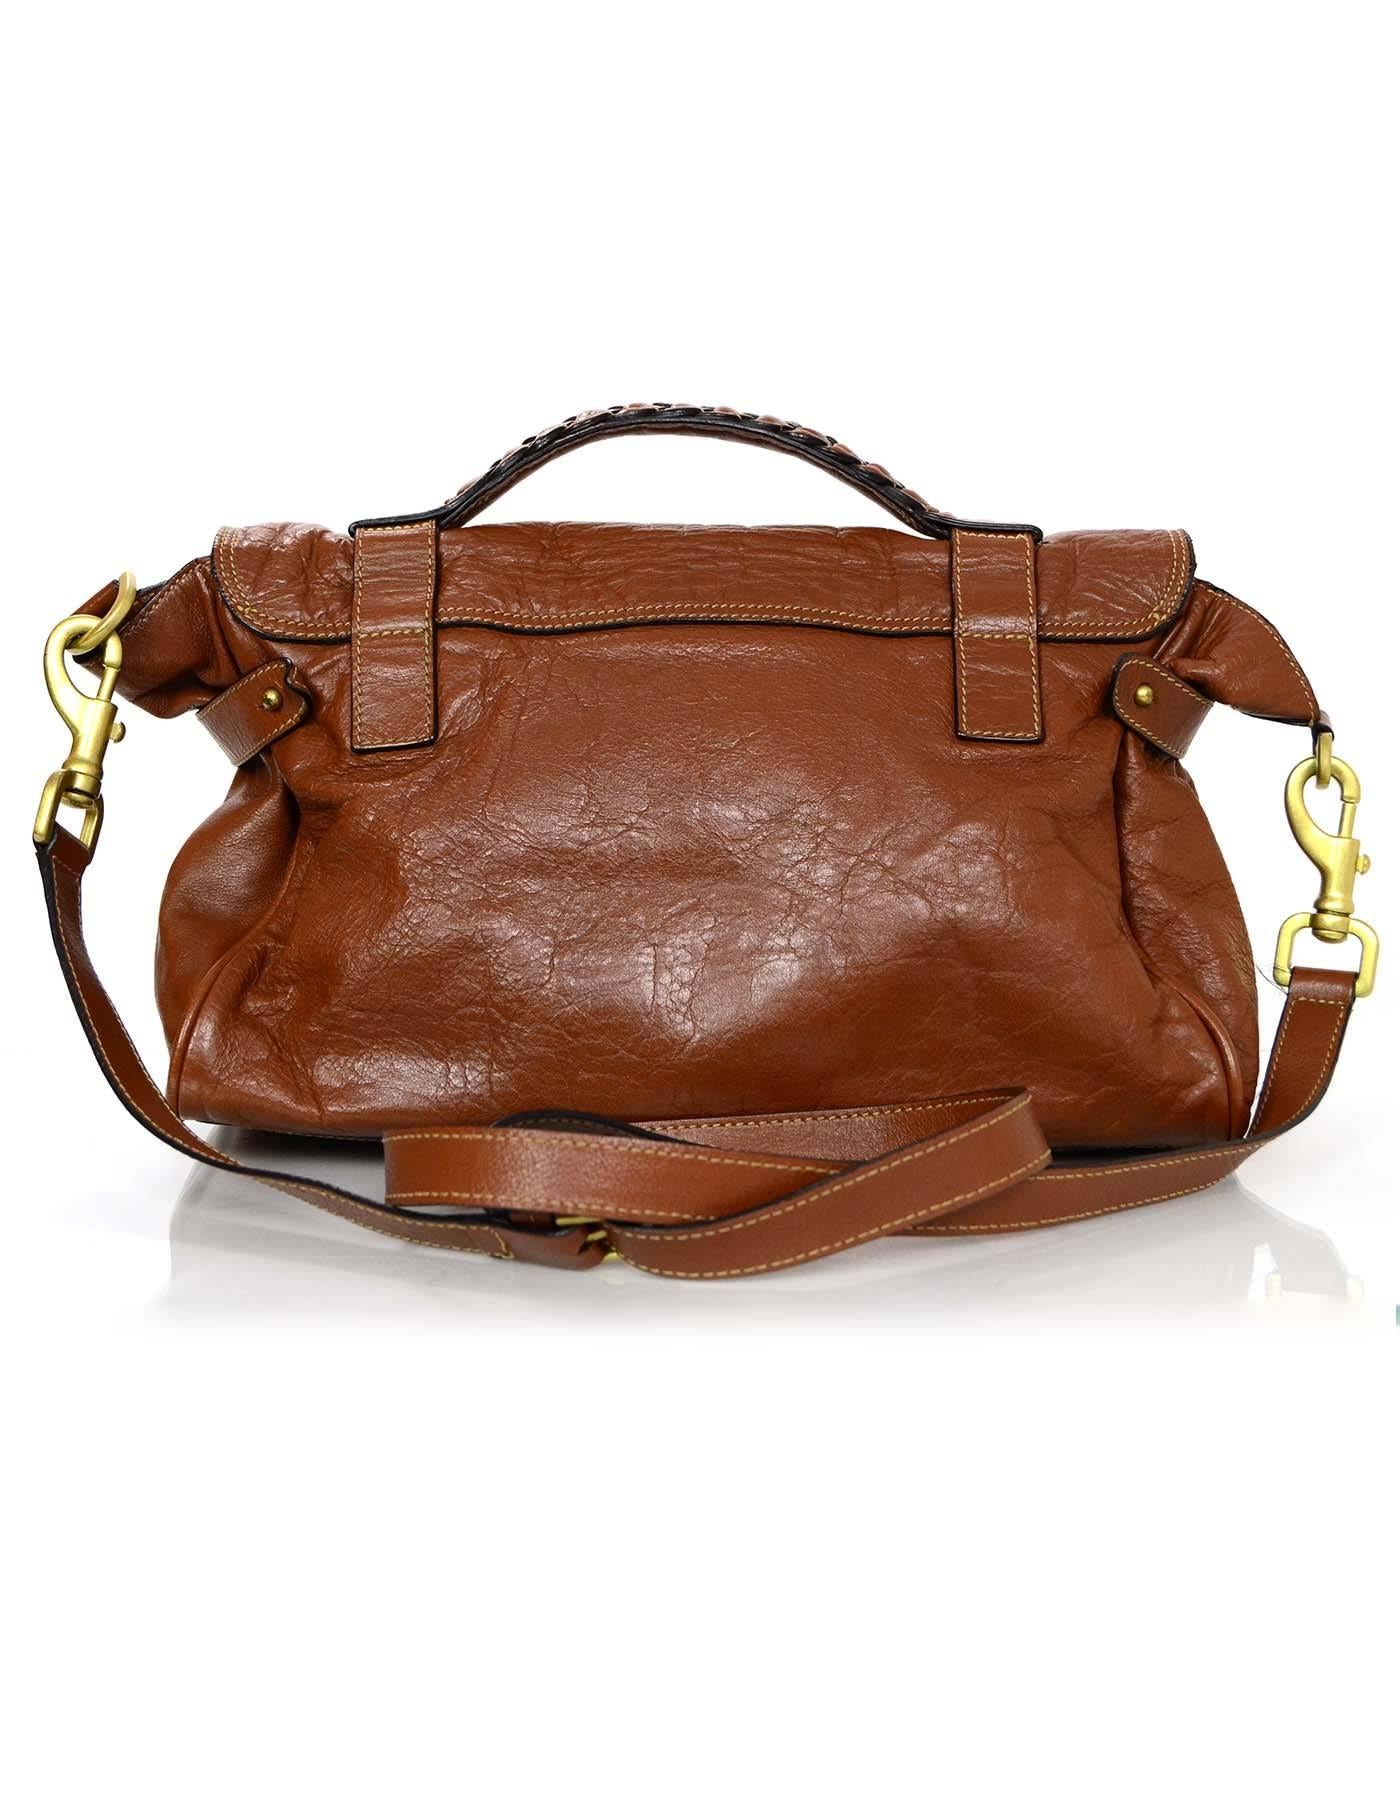 100% Authentic Mulberry Oak Leather Medium Alexa Satchel Bag. Features braided detail at handle and classic Mulberry twist lock. Optional long strap allows for crossbody use, making this a perfect everyday bag.

Made In: Turkey
Color: